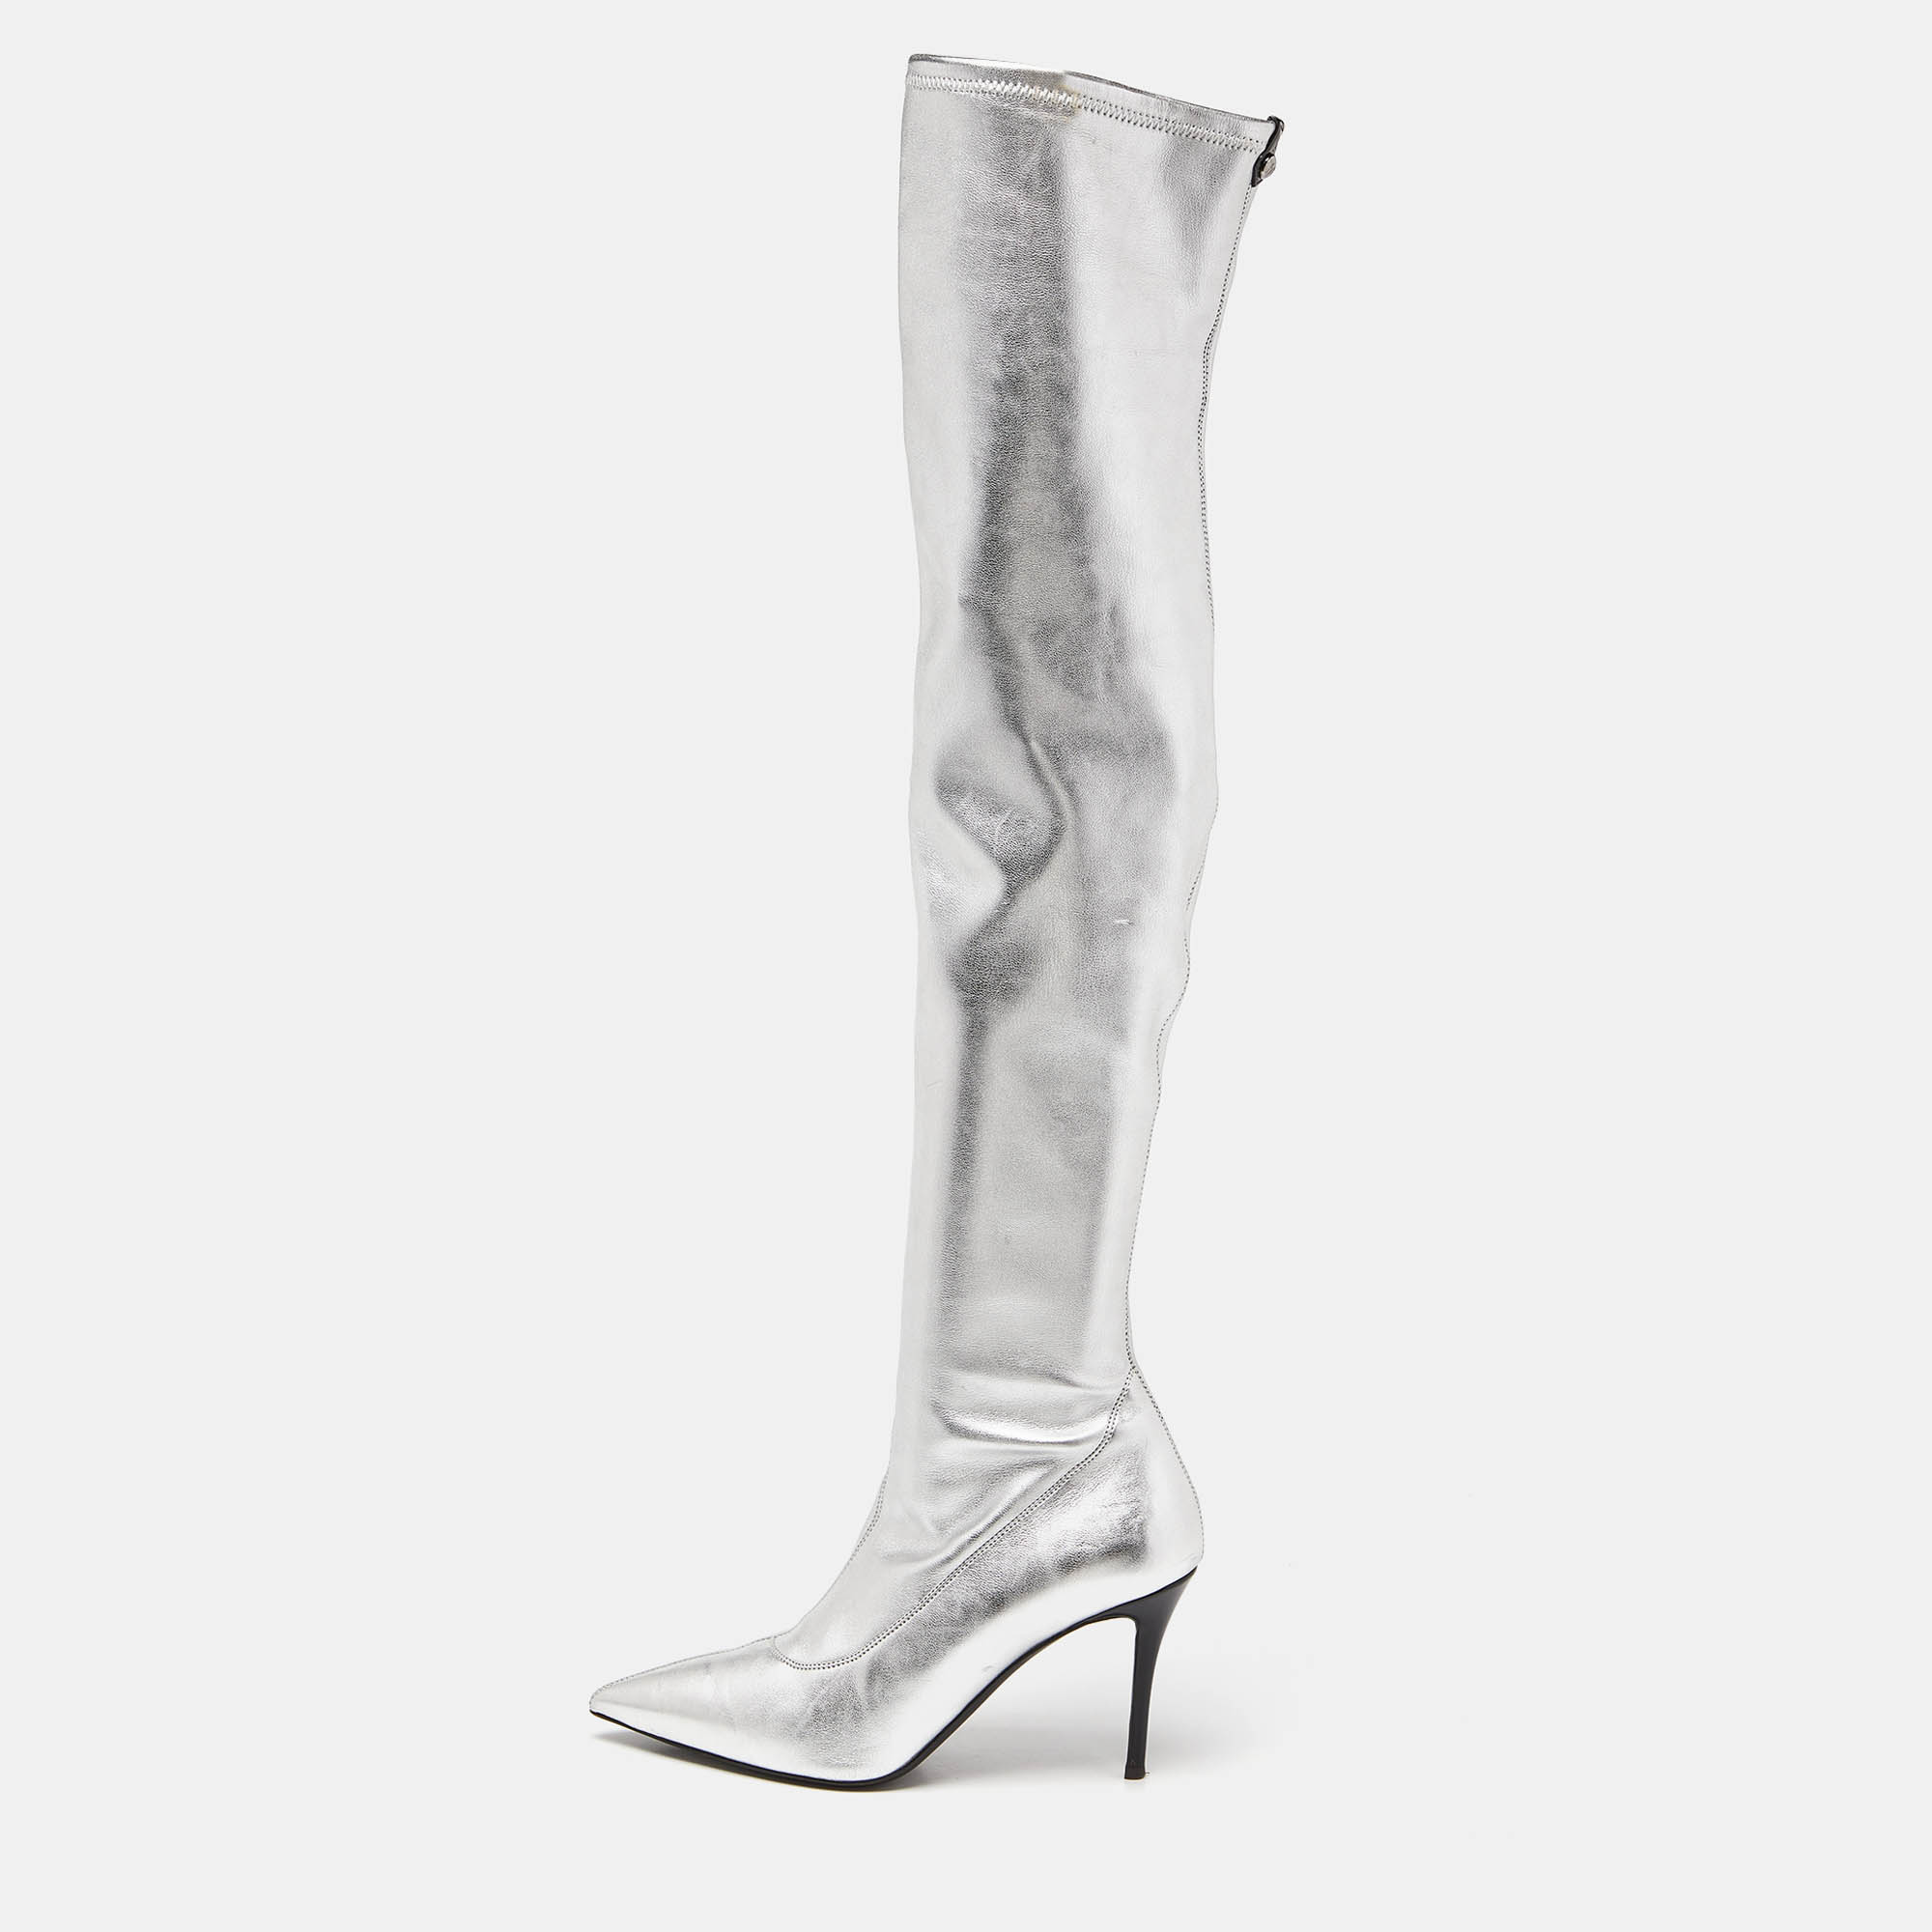 Pre-owned Giuseppe Zanotti Silver Foil Leather Over The Knee Pointed Toe Boots Size 40